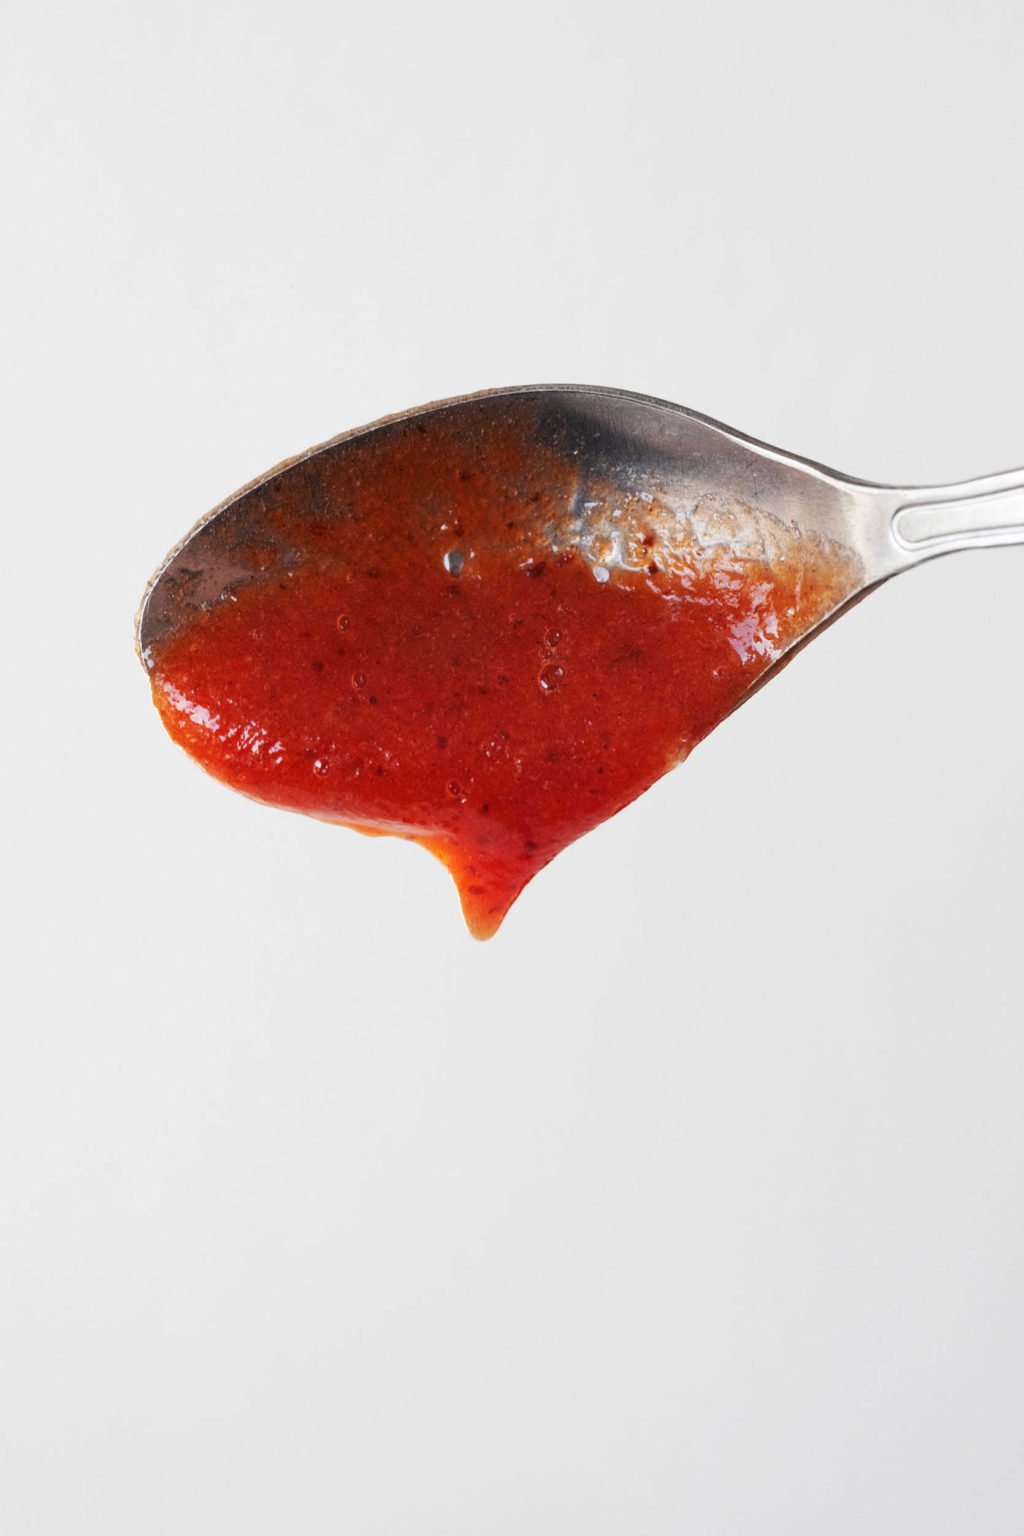 A metal spoon has been coated with a thick, red-orange sauce.